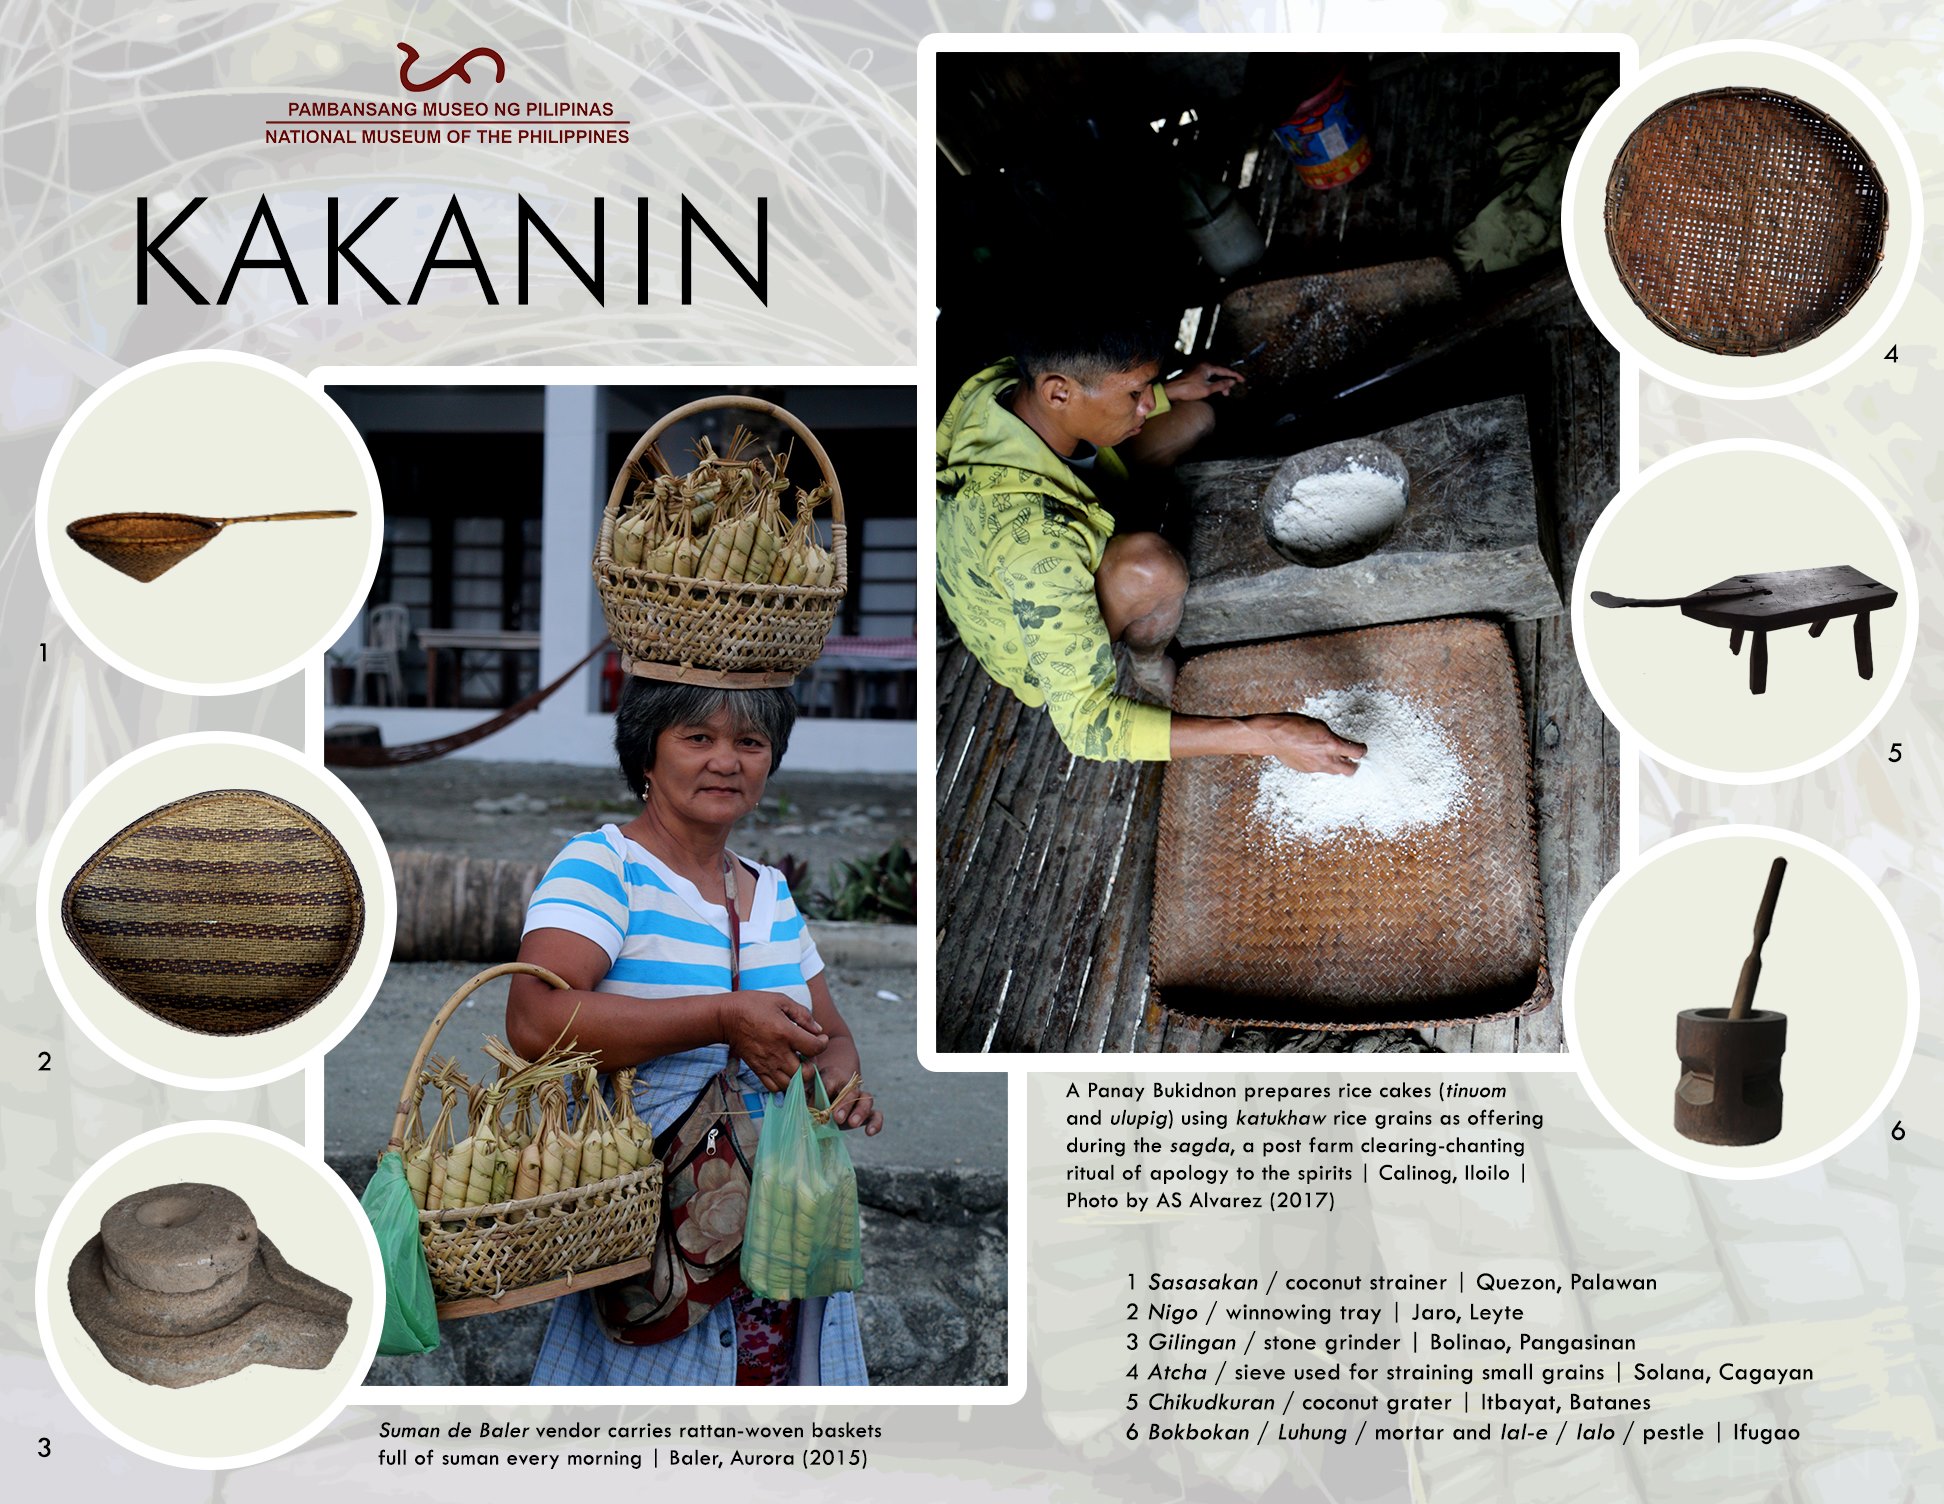 Kakanin or Rice Cake in the Philippines